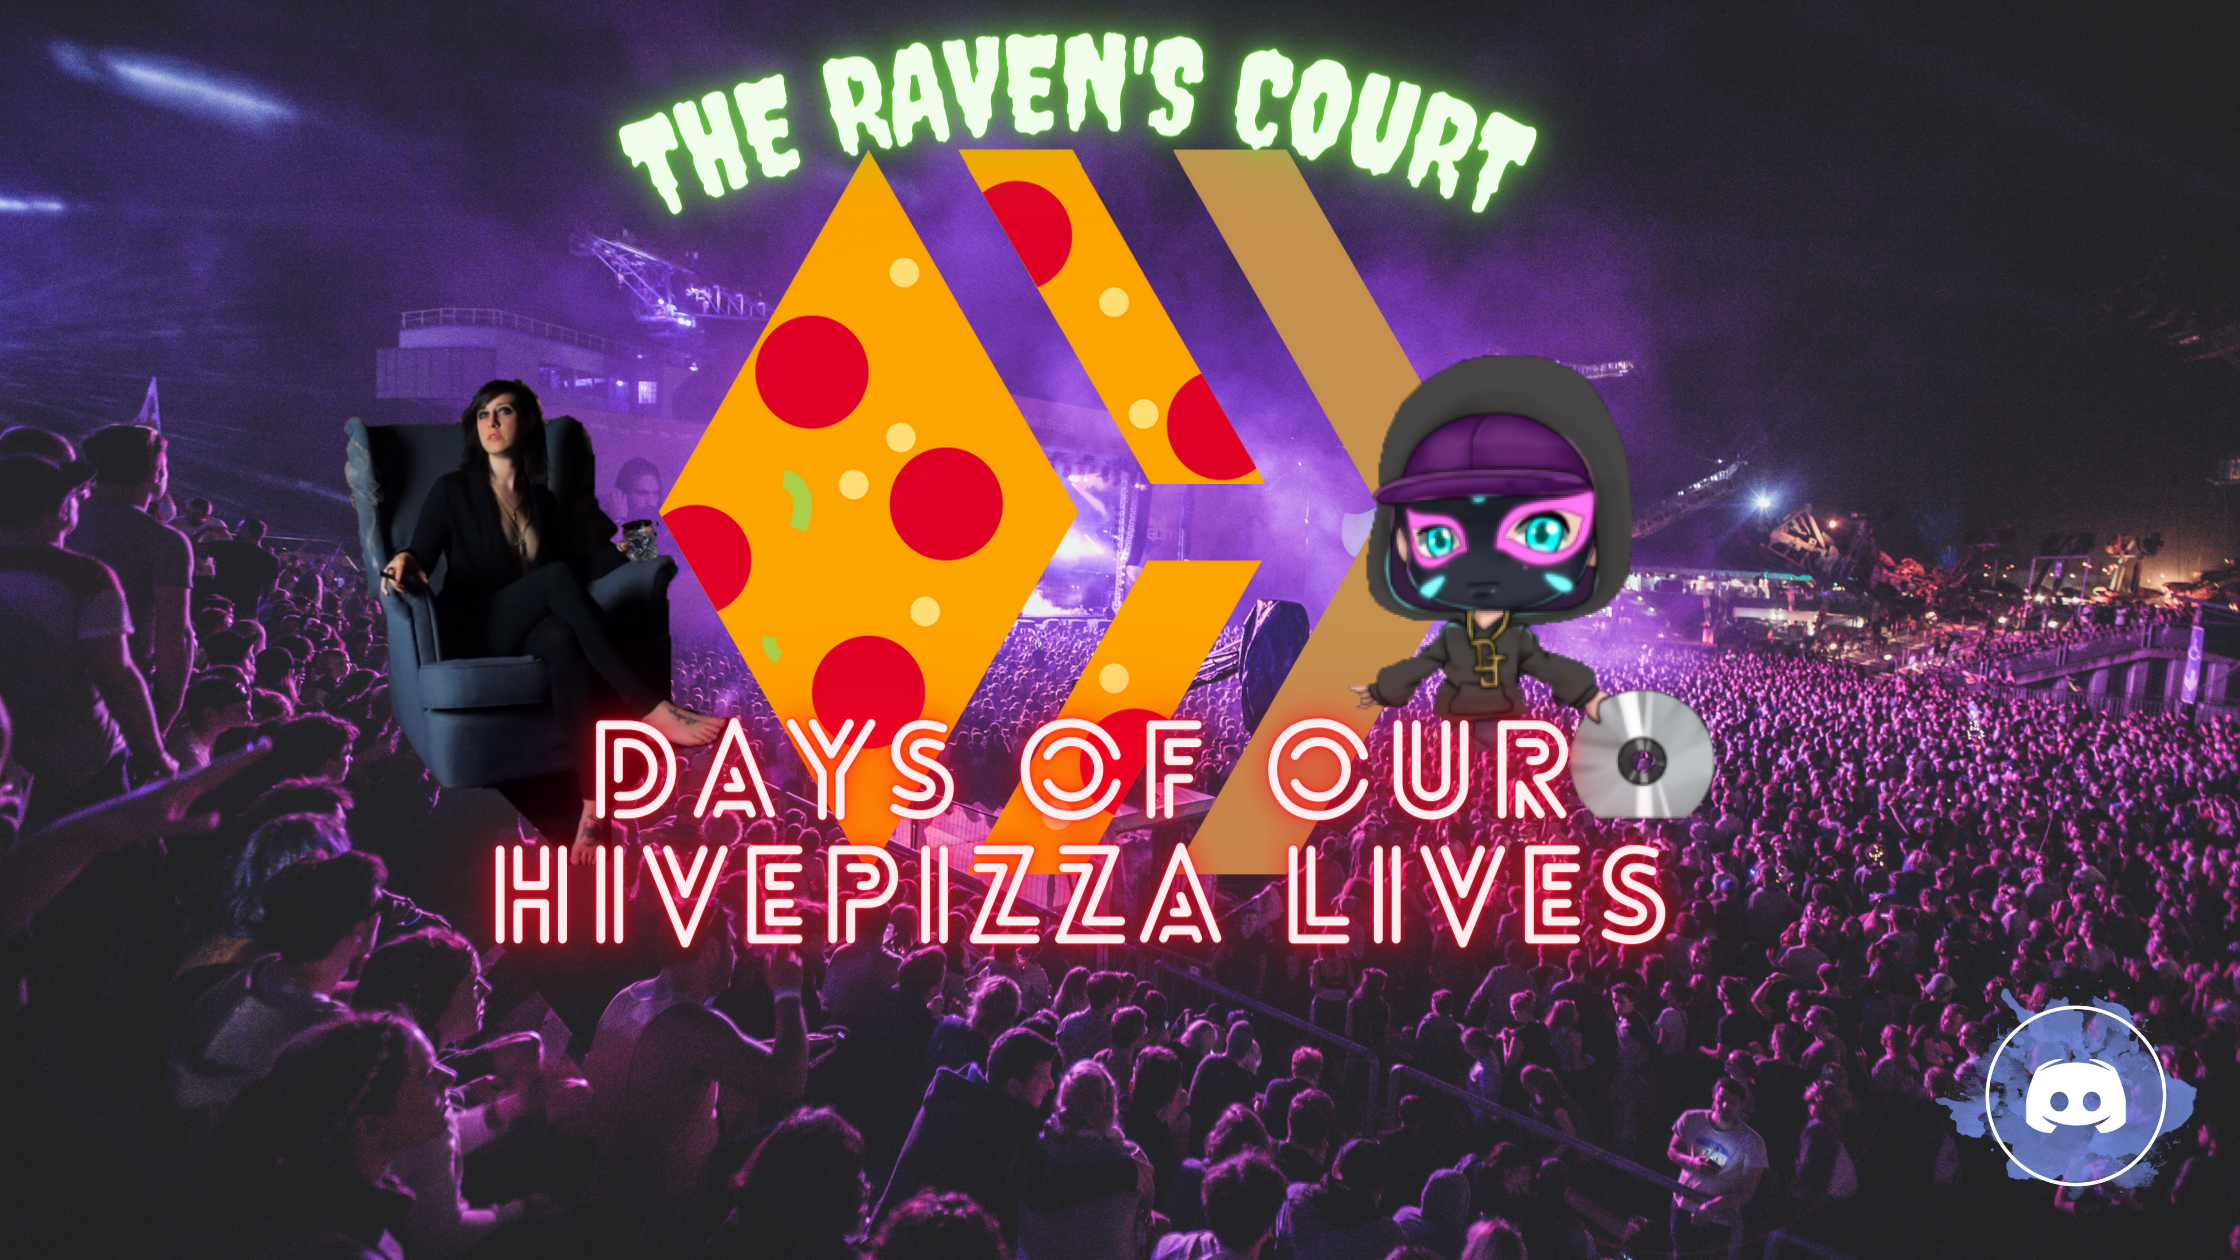 @blitzzzz/pizza-in-the-ravens-court-join-ravenmus1c-in-her-biweekly-music-show-this-weeks-theme-ravens-picks